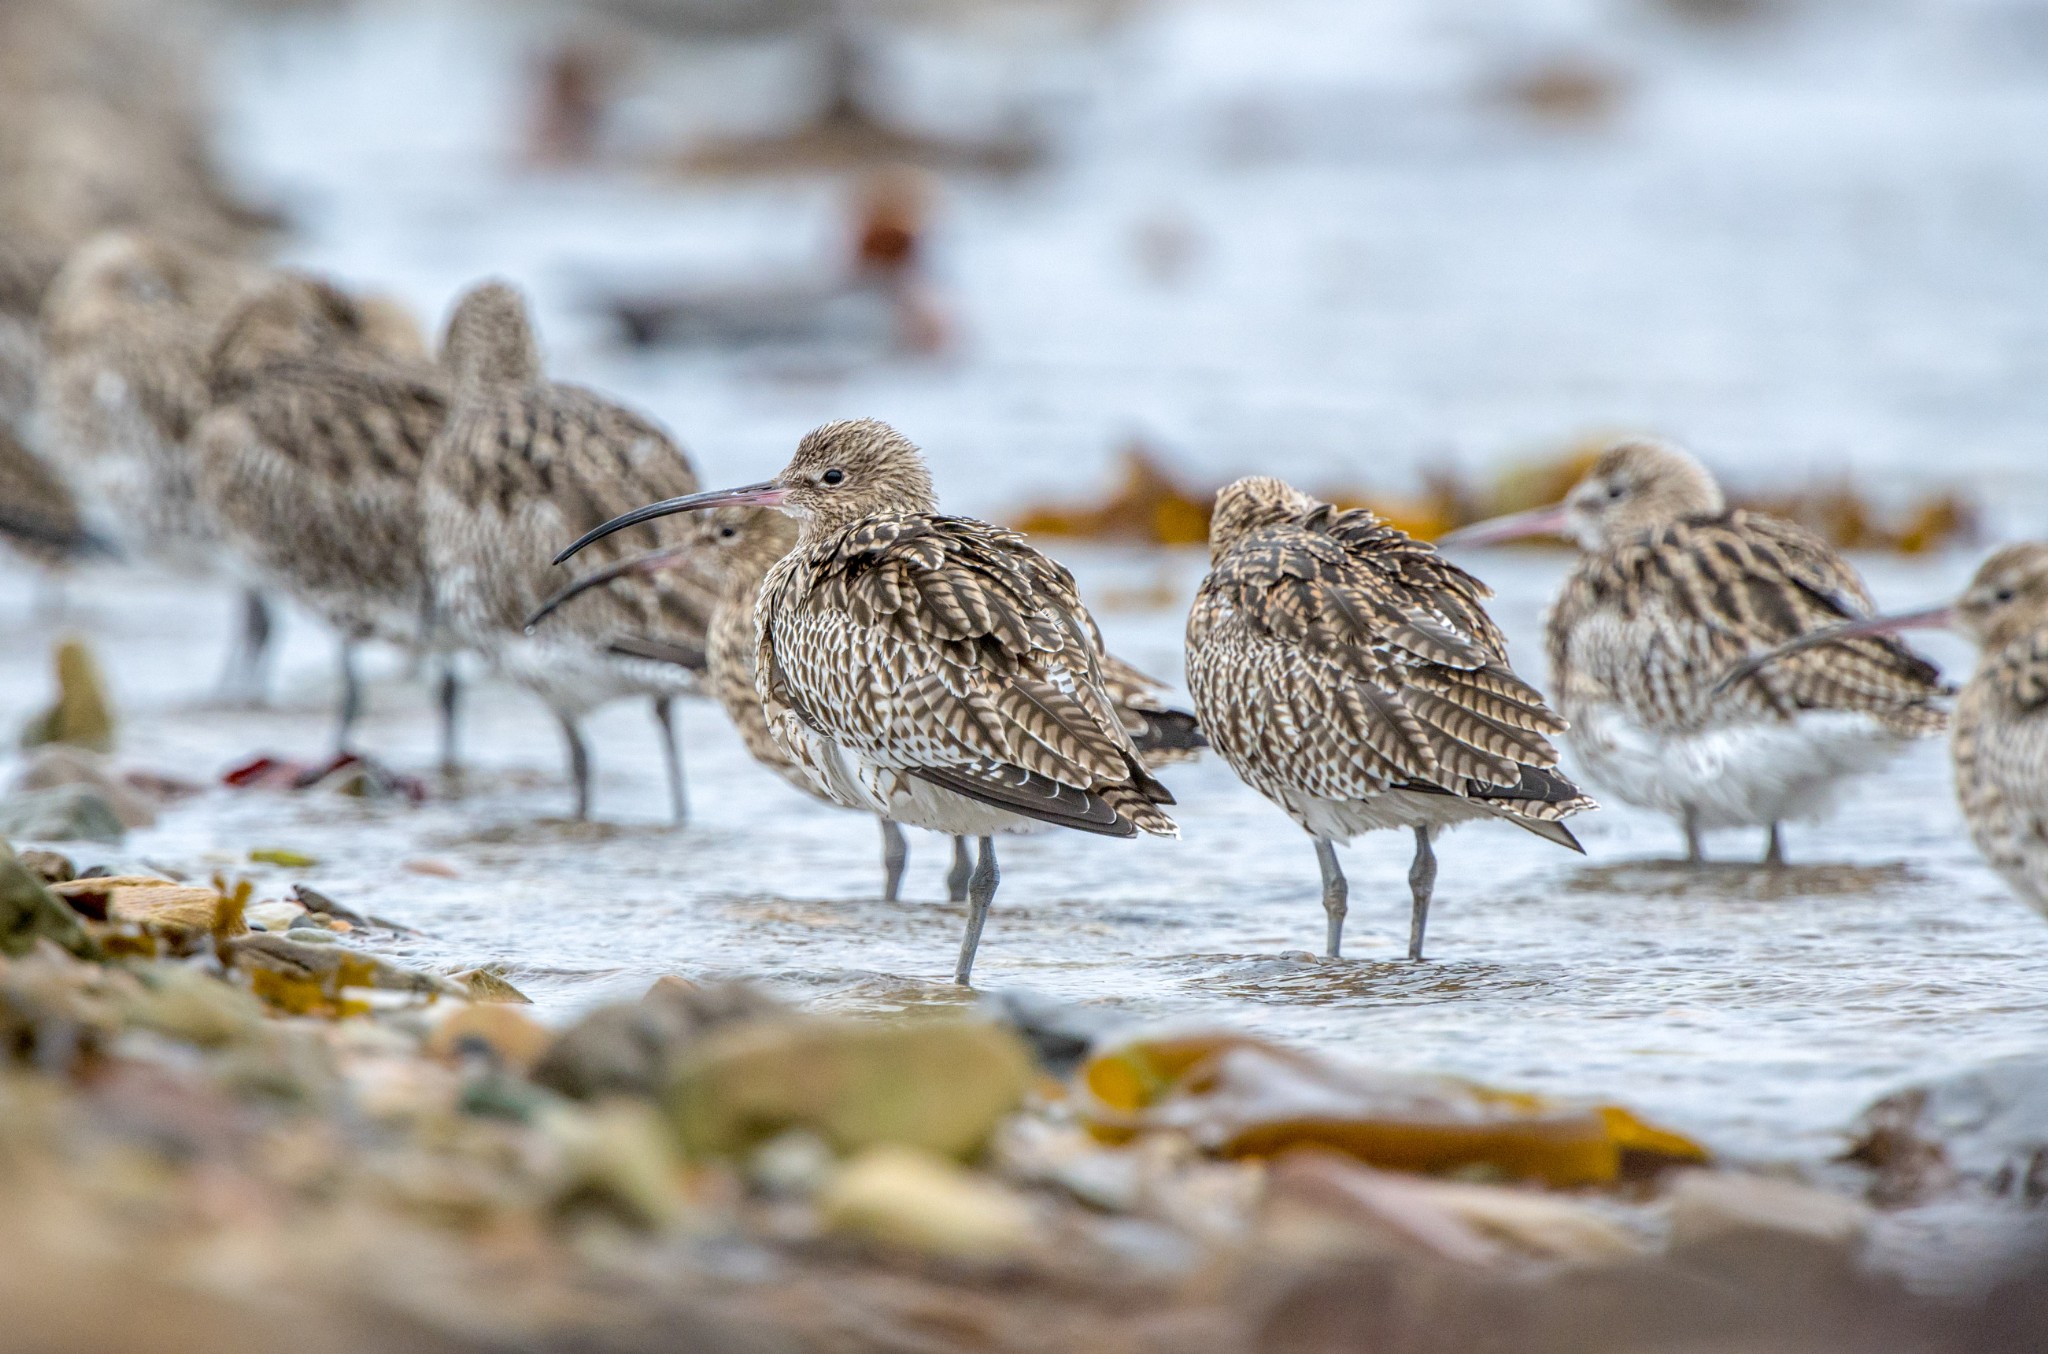 Curlew in Orkney - image by Raymond Besant